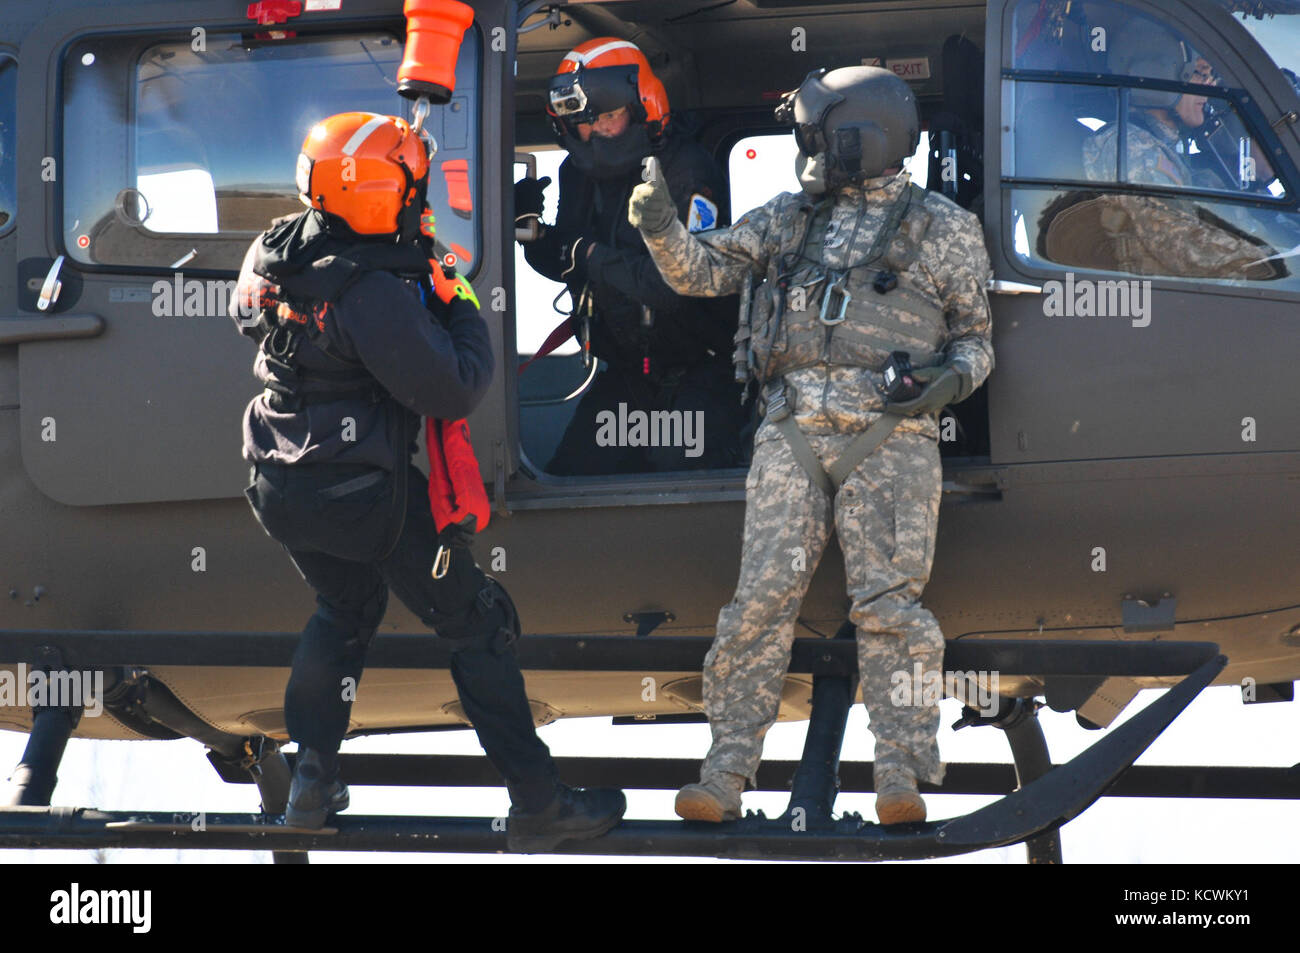 South Carolina National Guard Soldiers, and fire department/EMS rescuers with the S.C. Helicopter Aquatic Rescue Team (SC-HART) program, S.C. Urban Search and Rescue Task Force 1 (SC-TF1), perform hoist-training operations during the preliminary phases of âPatriot South Exercise 2017â (Patriot South 17), a joint training-exercise focused on natural disaster-response and preparedness, Gulfport and Port Bienville Industrial Complex (PBIC), Mississippi, Jan. 29, 2017. Patriot South 17 is taking place at multiple locations across Mississippi, from January 23 through February 7, 2017, and it offers Stock Photo